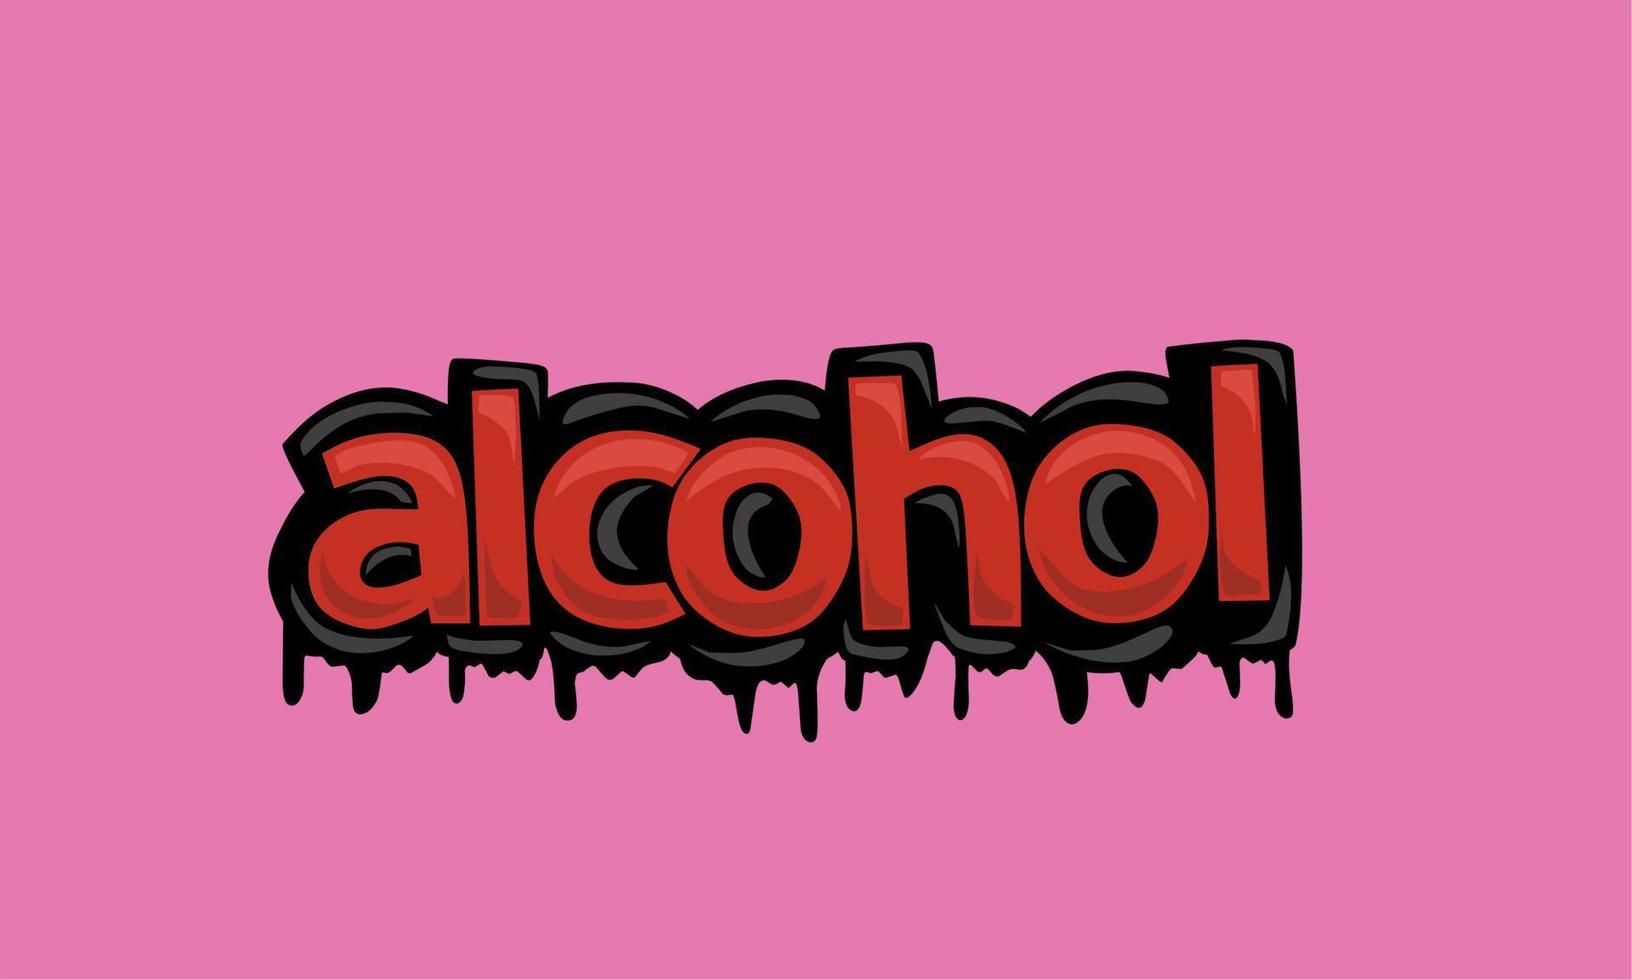 ALCOHOL writing vector design on pink background